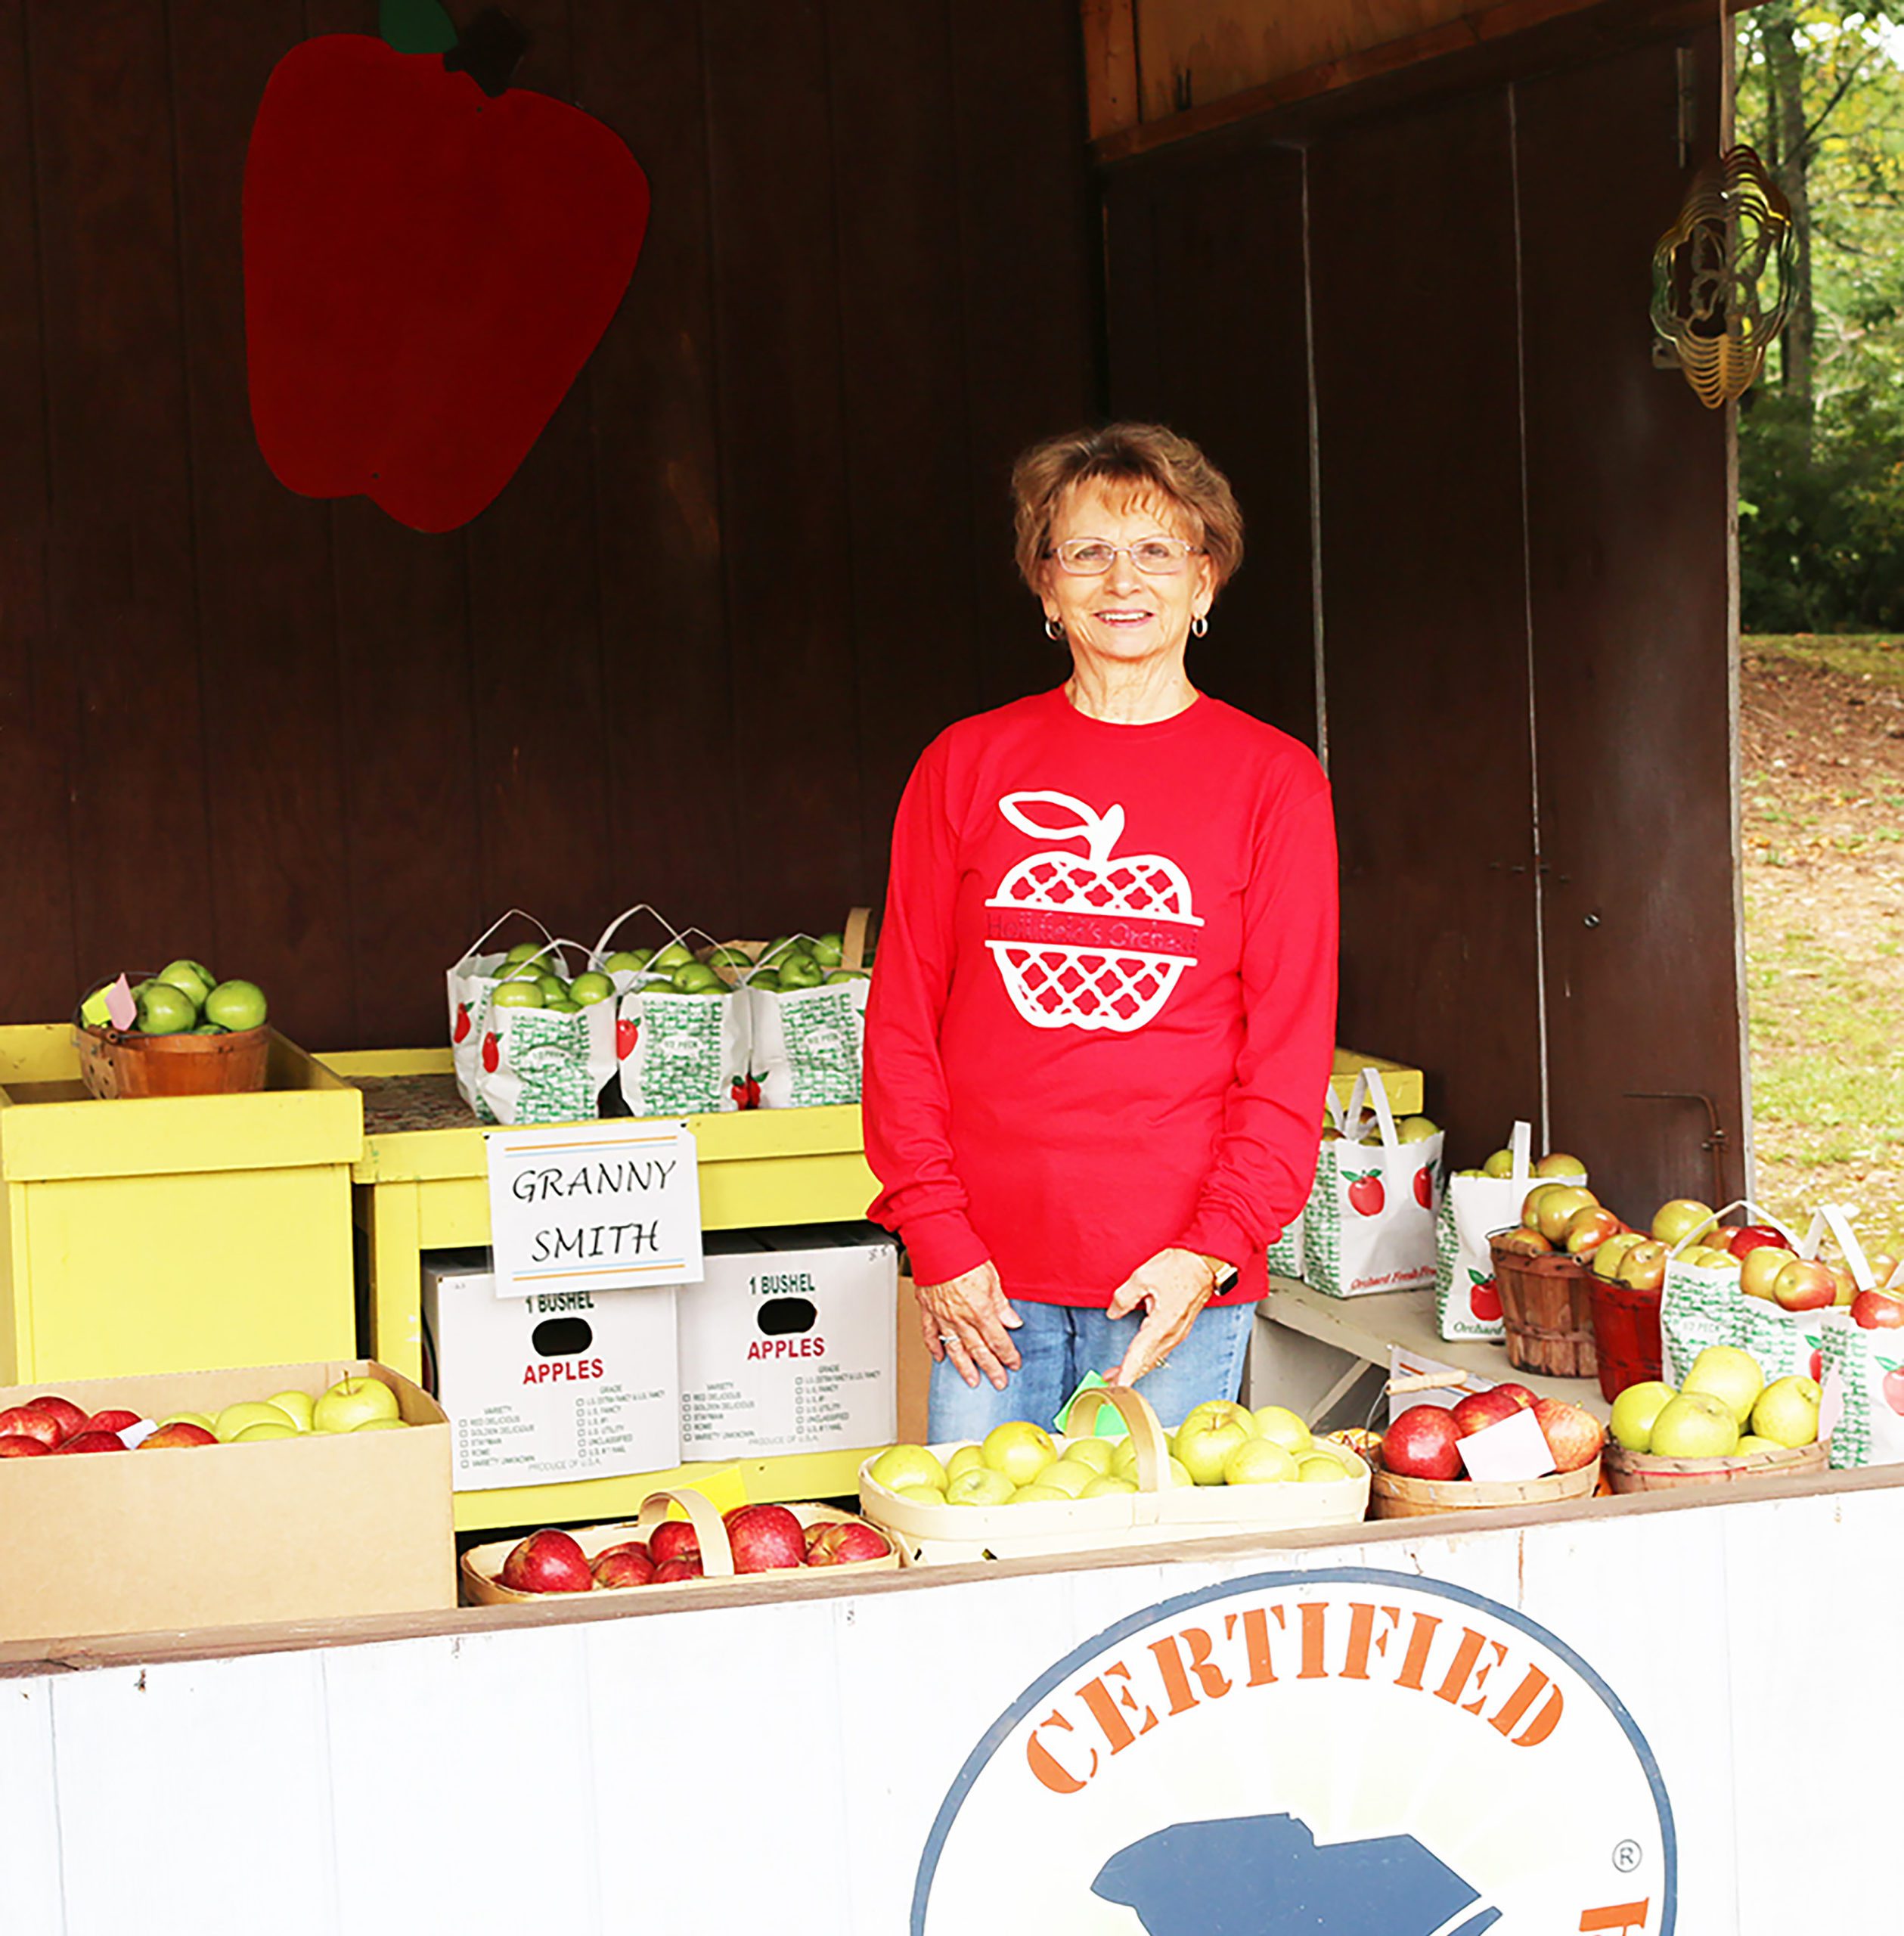 Susan Hollifield runs the Hollifield Orchard stand in Long Creek, South Carolina, where she sells apples grown in her family's orchard.